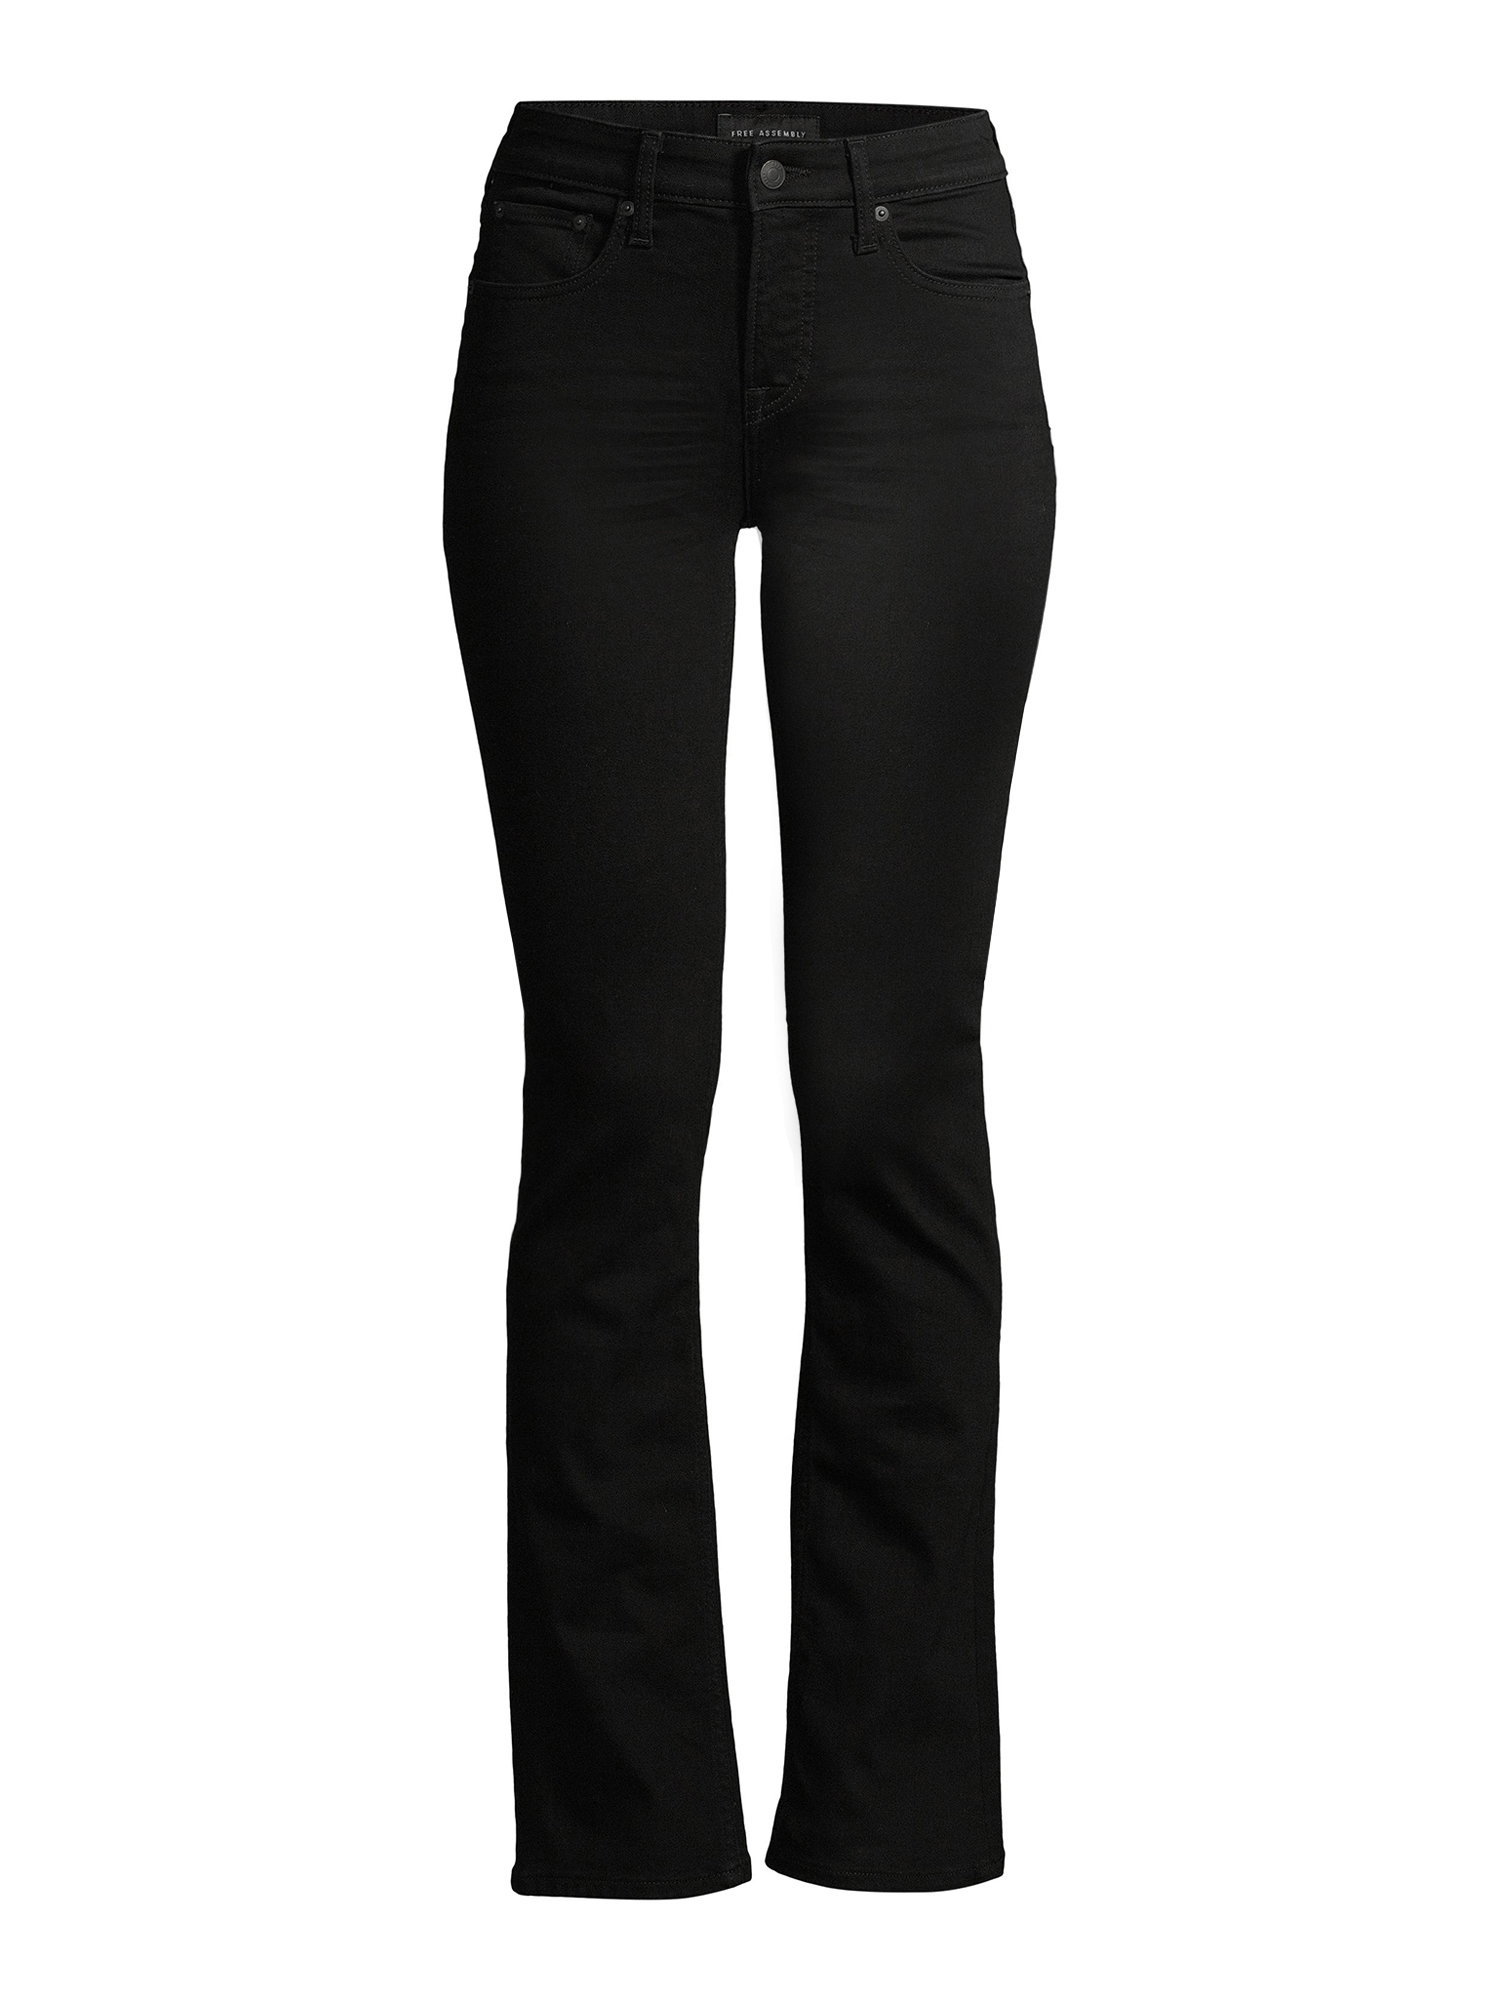 Free Assembly Women's Essential Mid-Rise Bootcut Jeans - Walmart.com